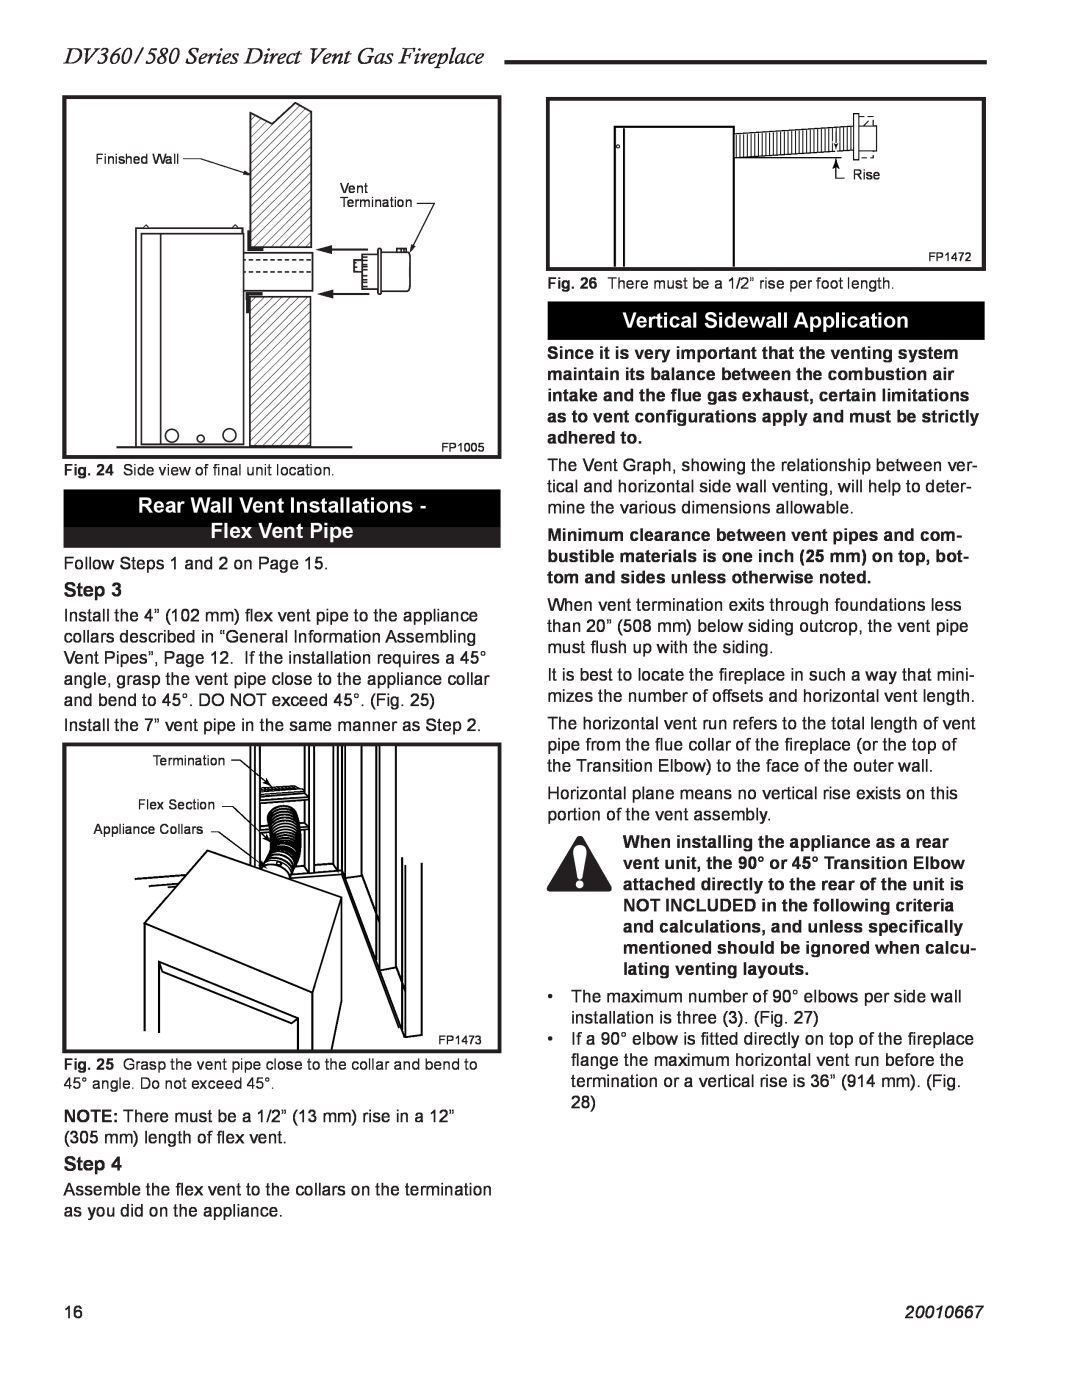 Vermont Casting DV360 manual Rear Wall Vent Installations Flex Vent Pipe, Vertical Sidewall Application, Step, 20010667 